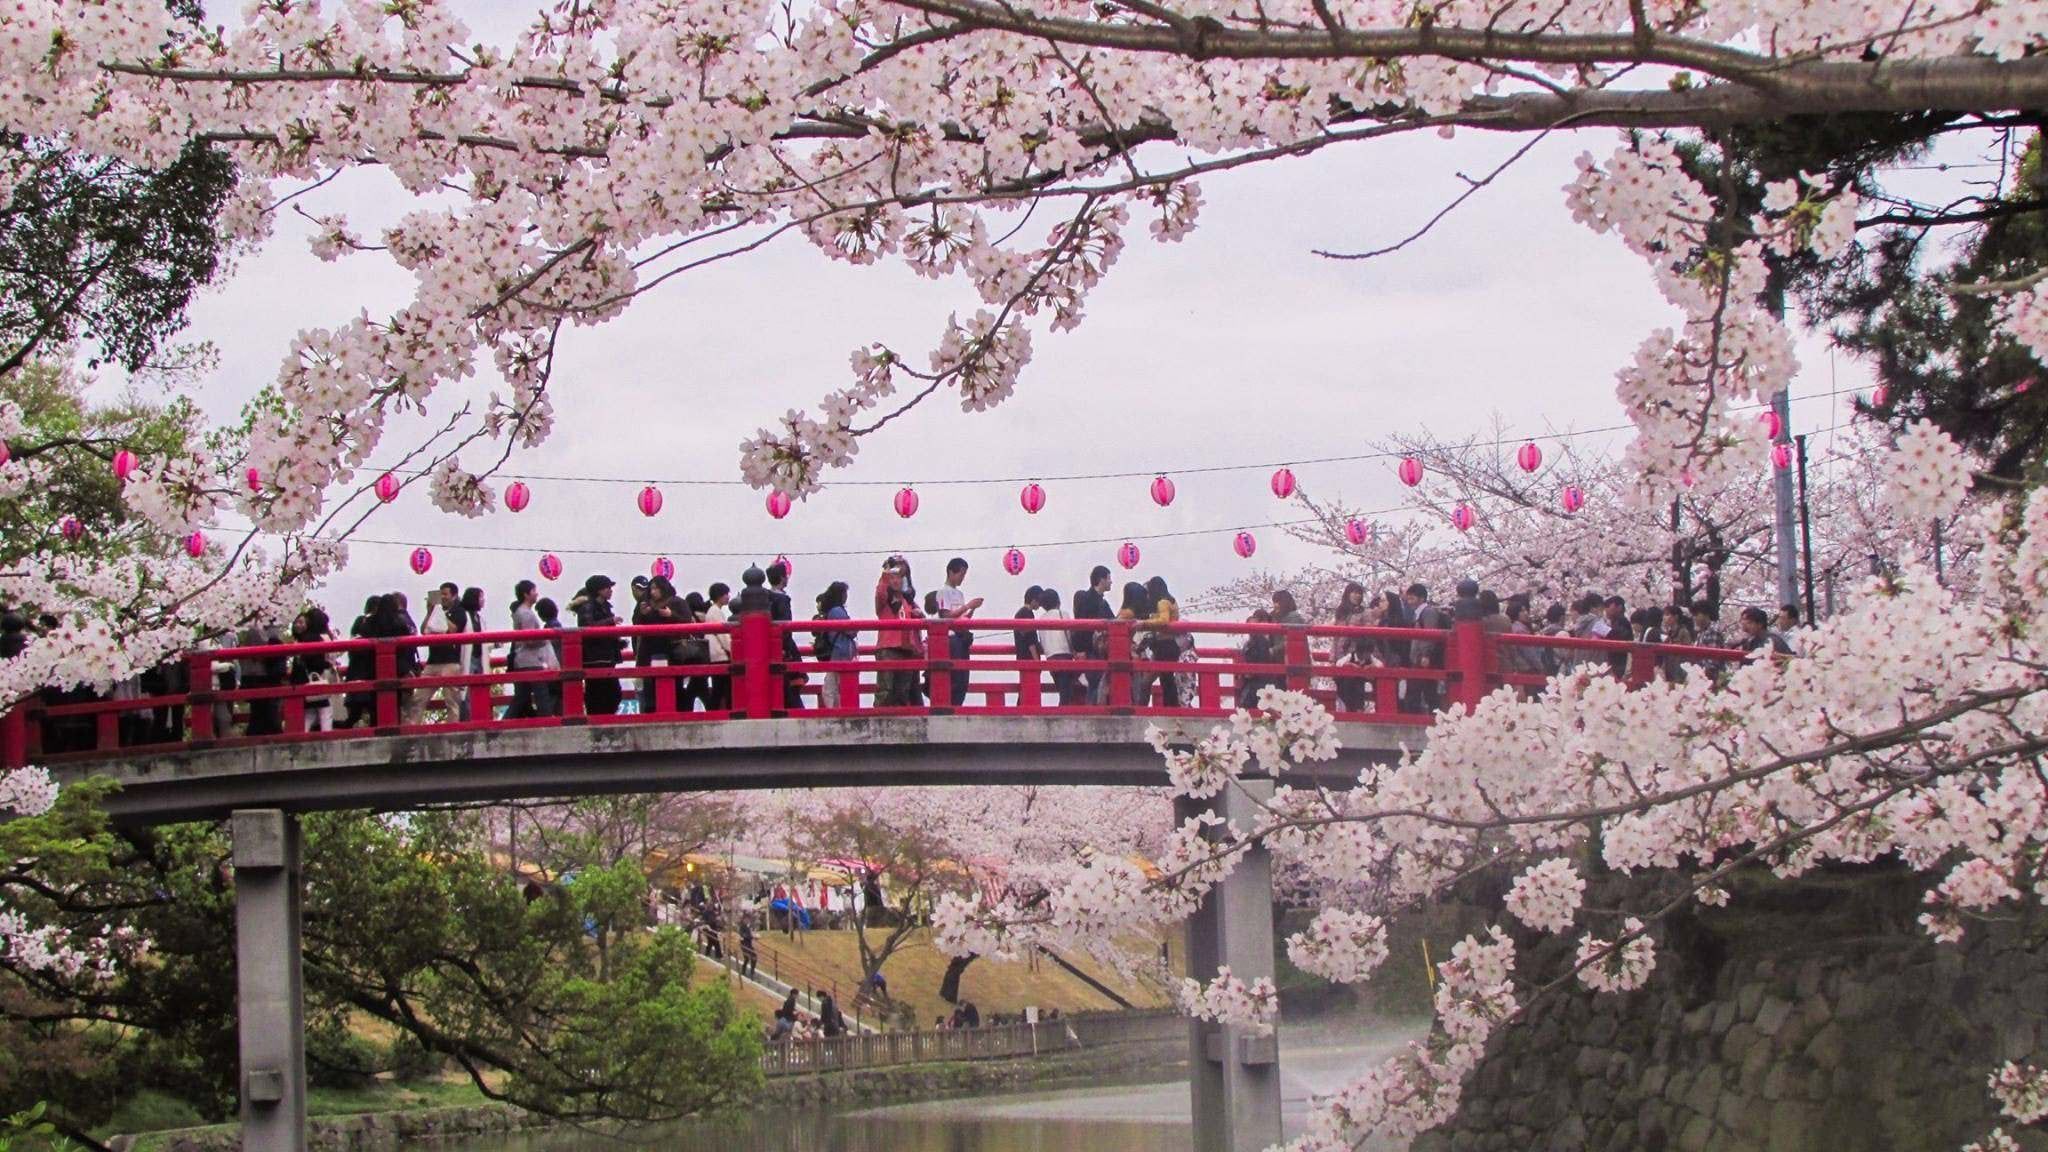 A bridge over water with people on it - Japanese